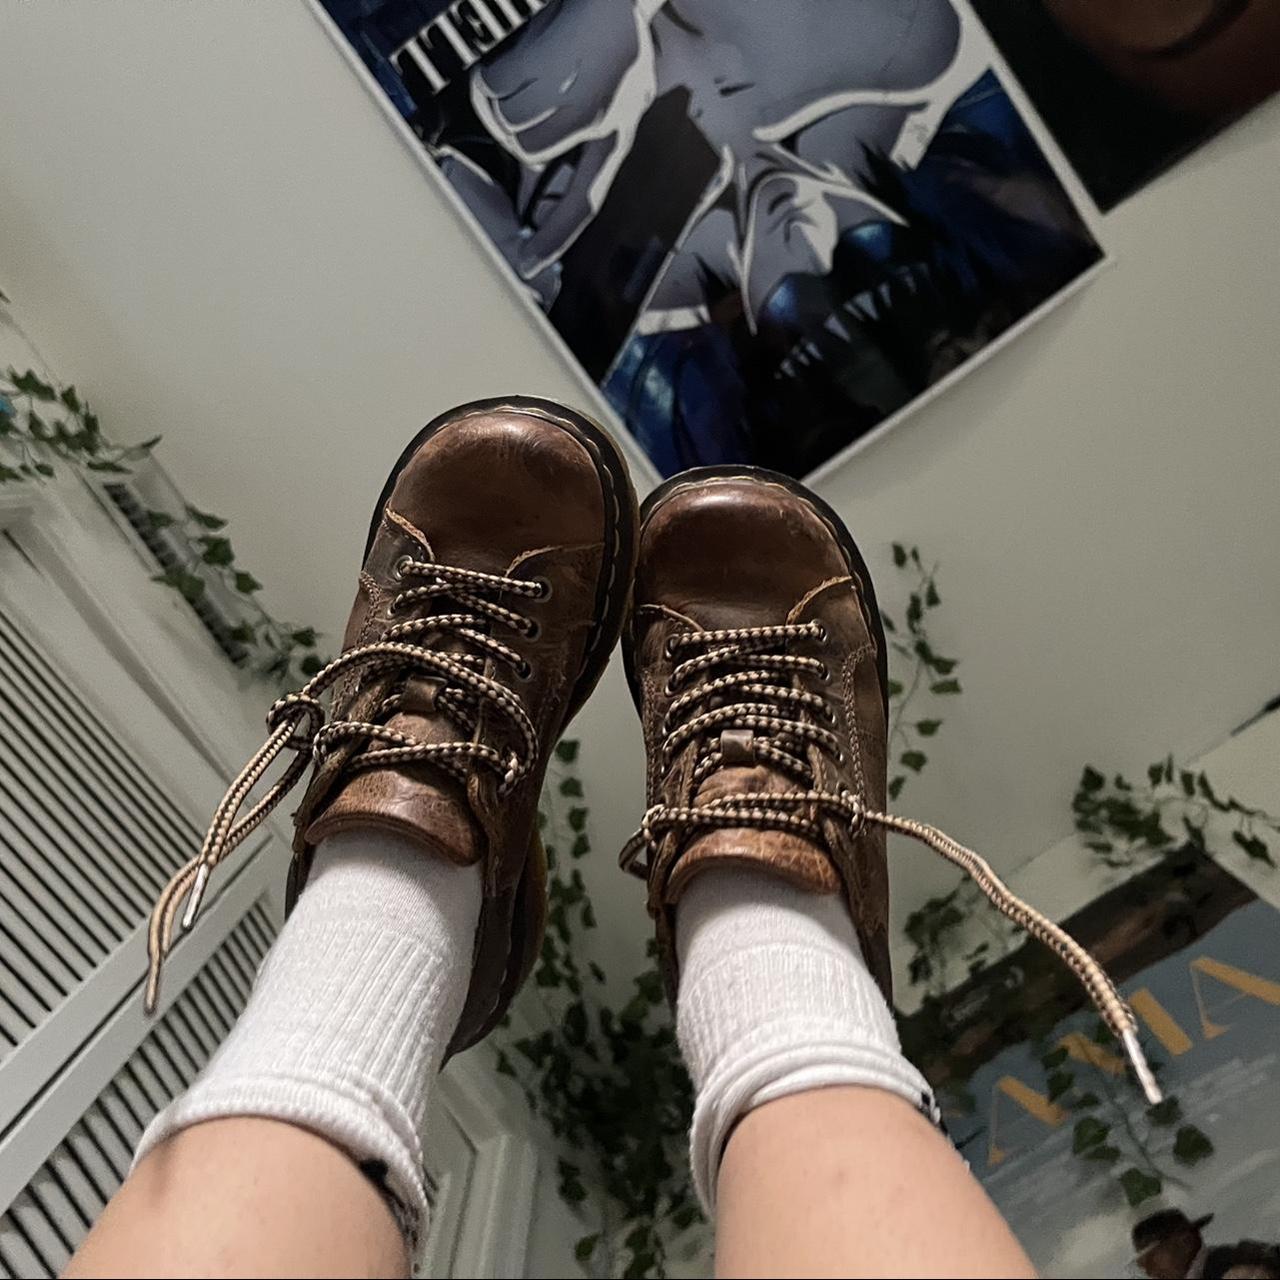 Dr. Martens Women's Brown and Tan Oxfords (2)